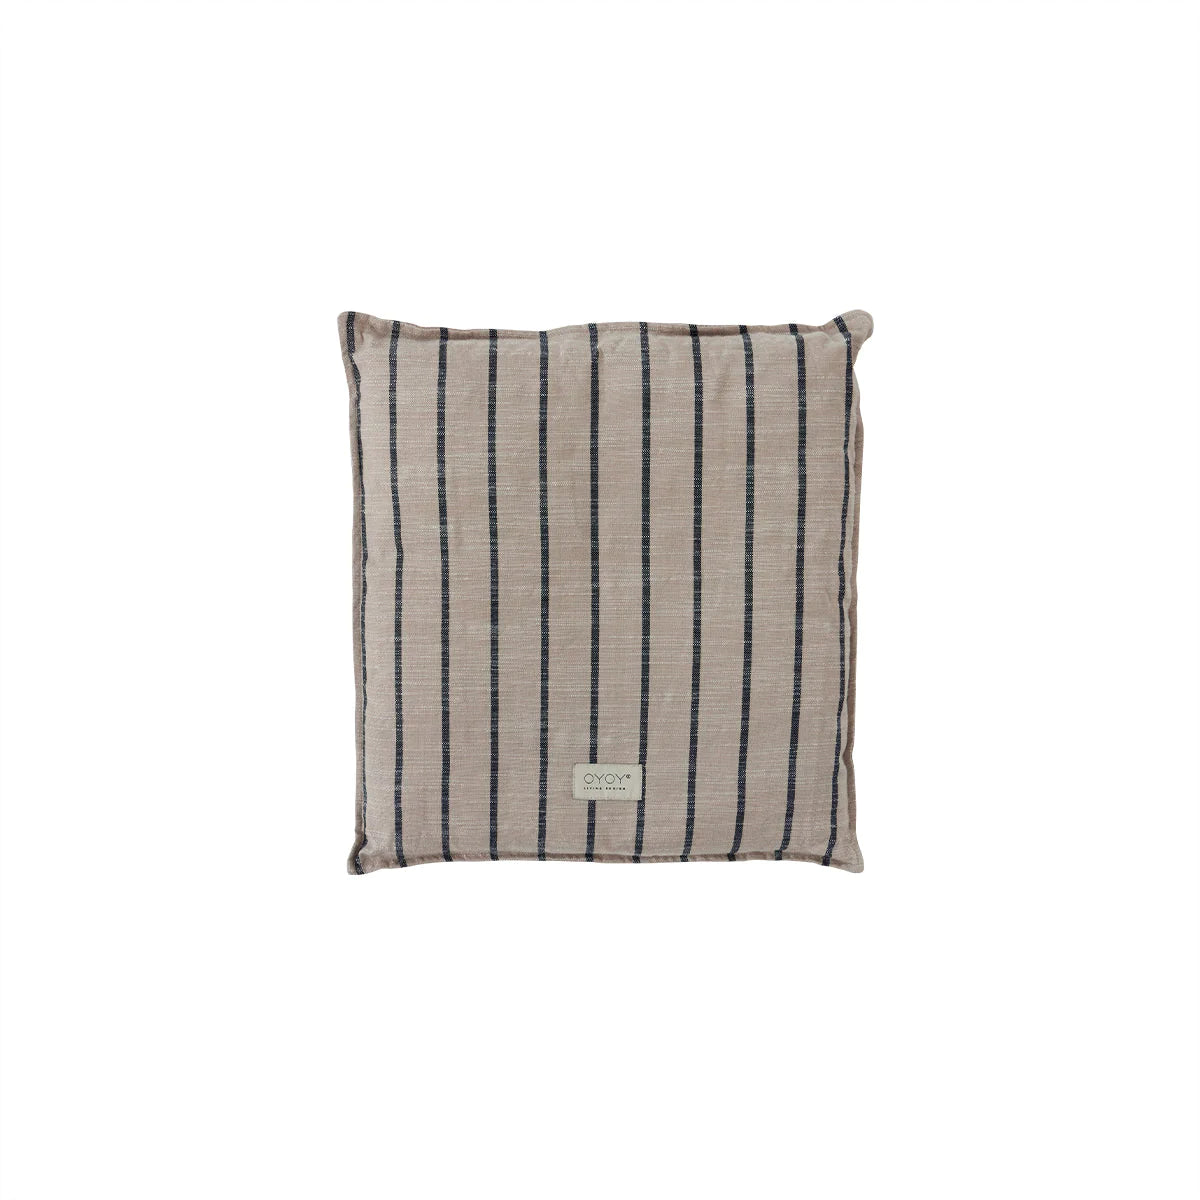 Kyoto outdoor square cushion, clay